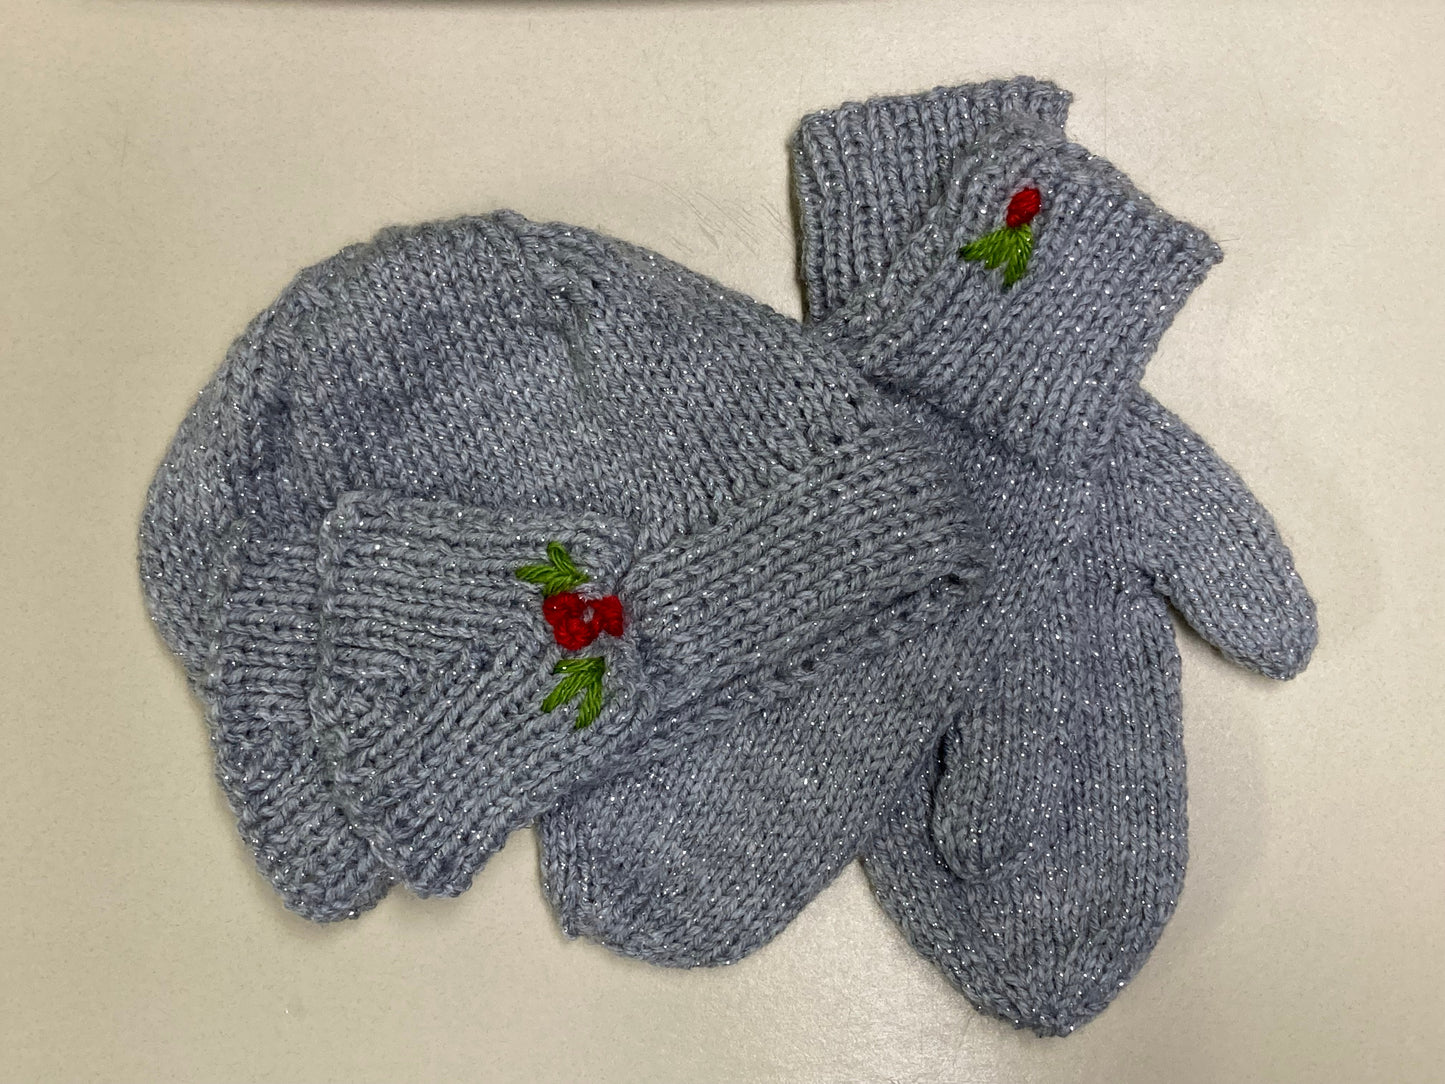 Hand knitted hat and glove set - Free Shipping